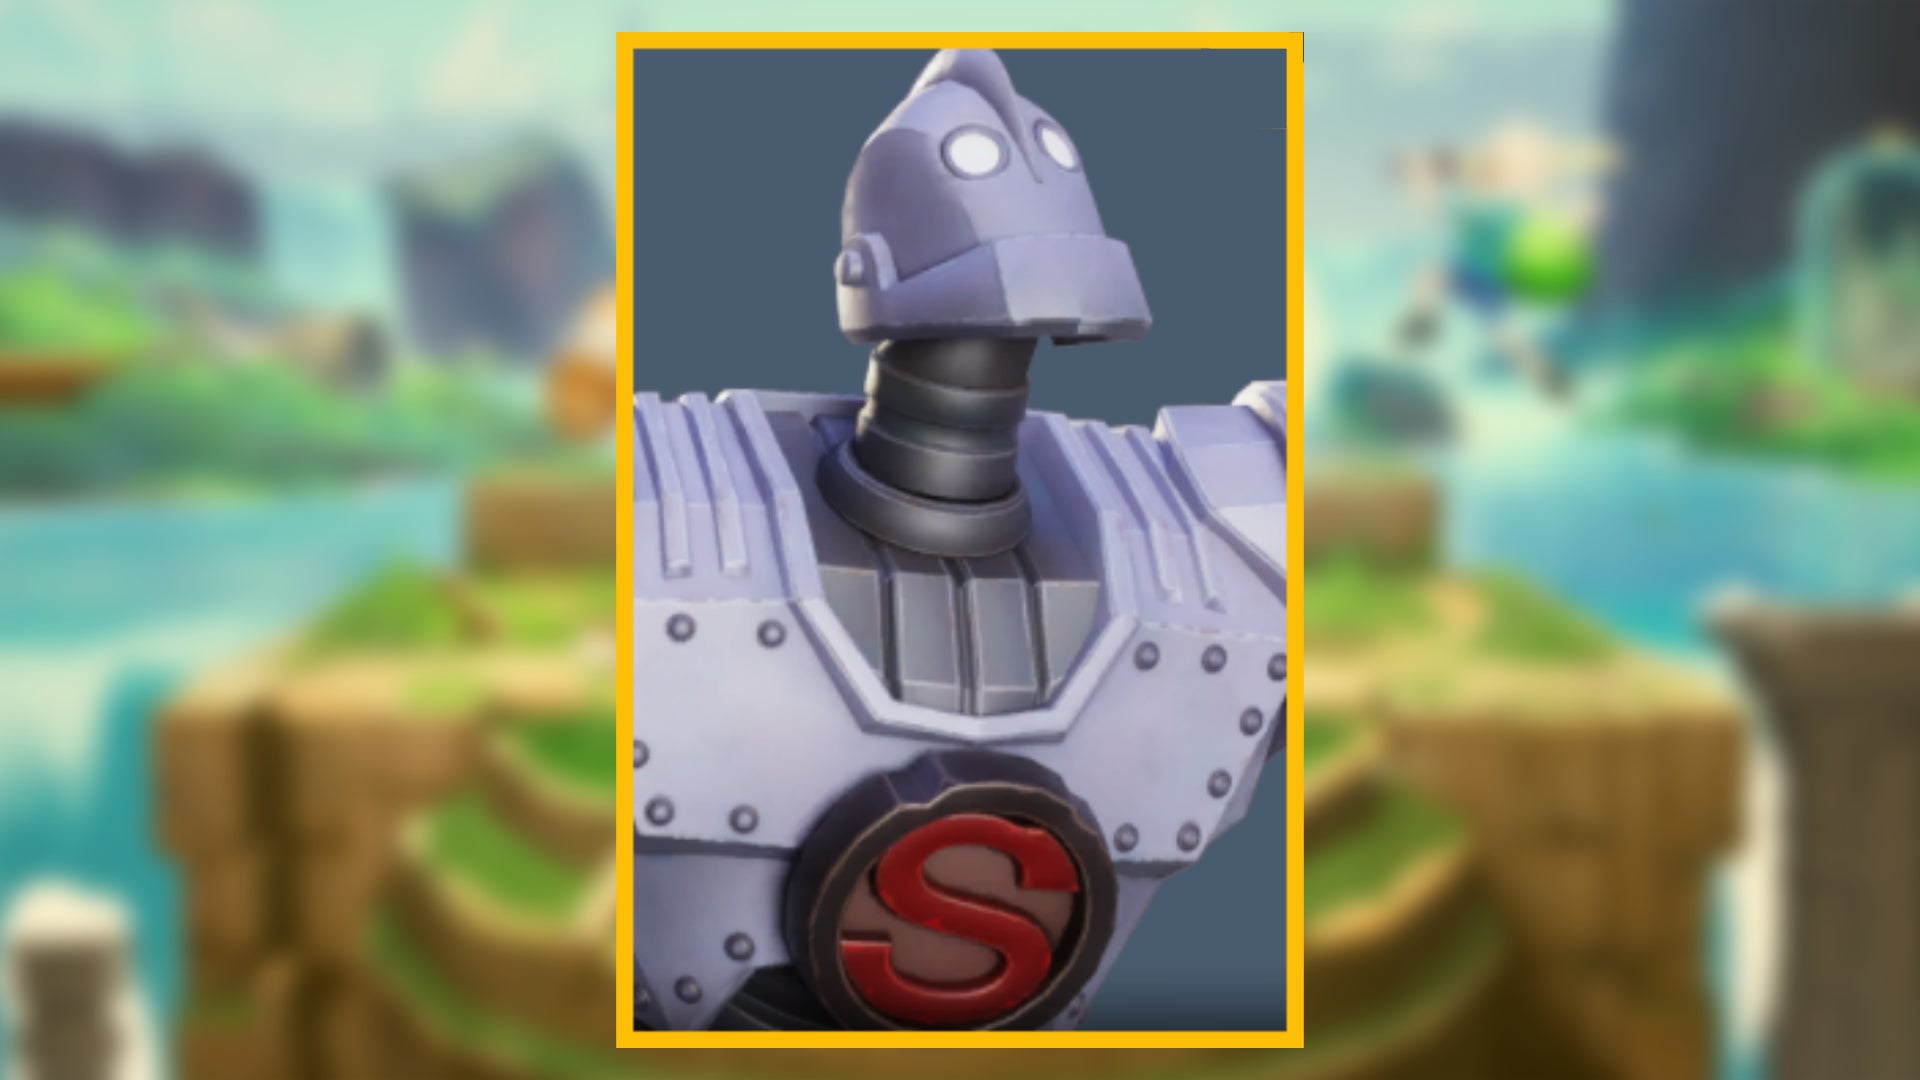 The character portrait of Iron Giant, a playable character in MultiVersus, against a blurred background.